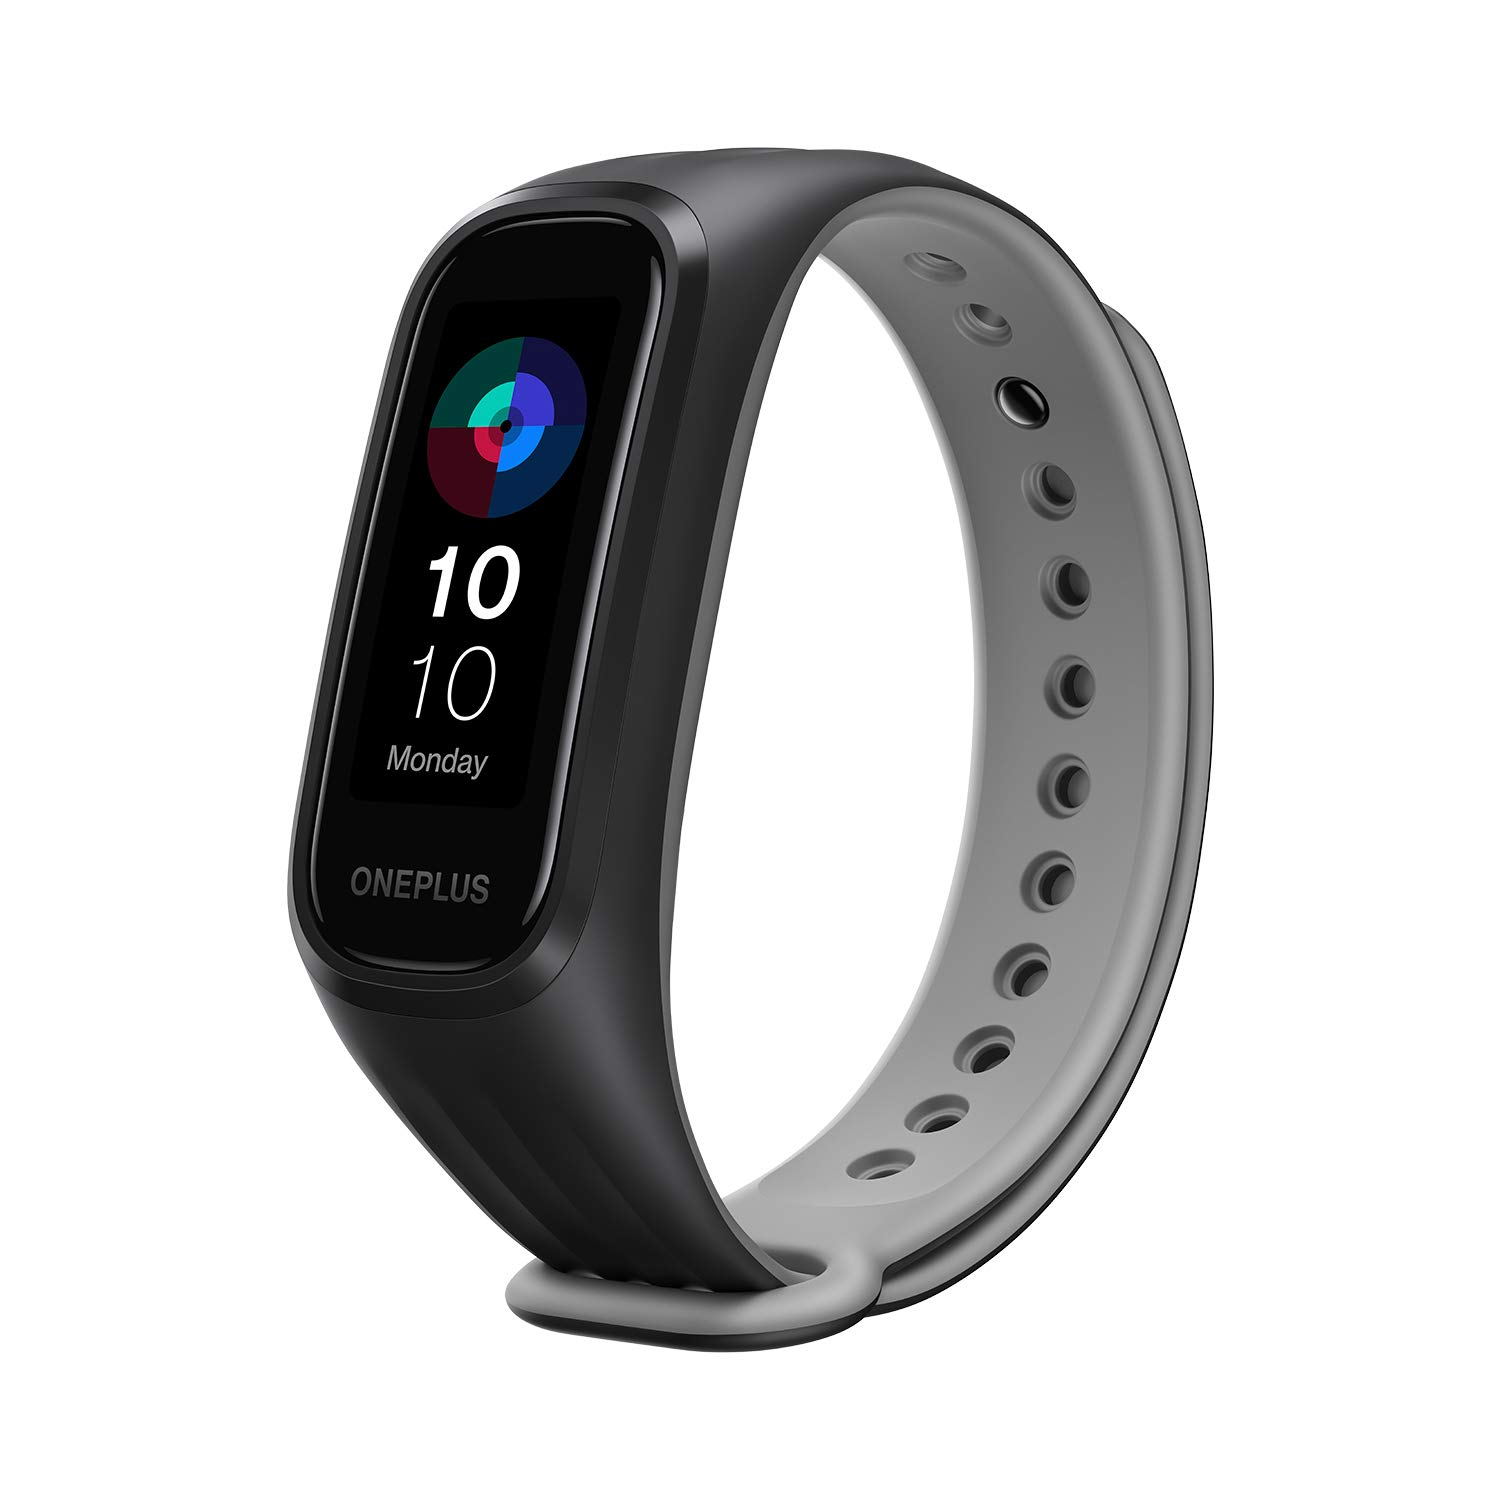 2. Best OnePlus Smart Fitness Band In India